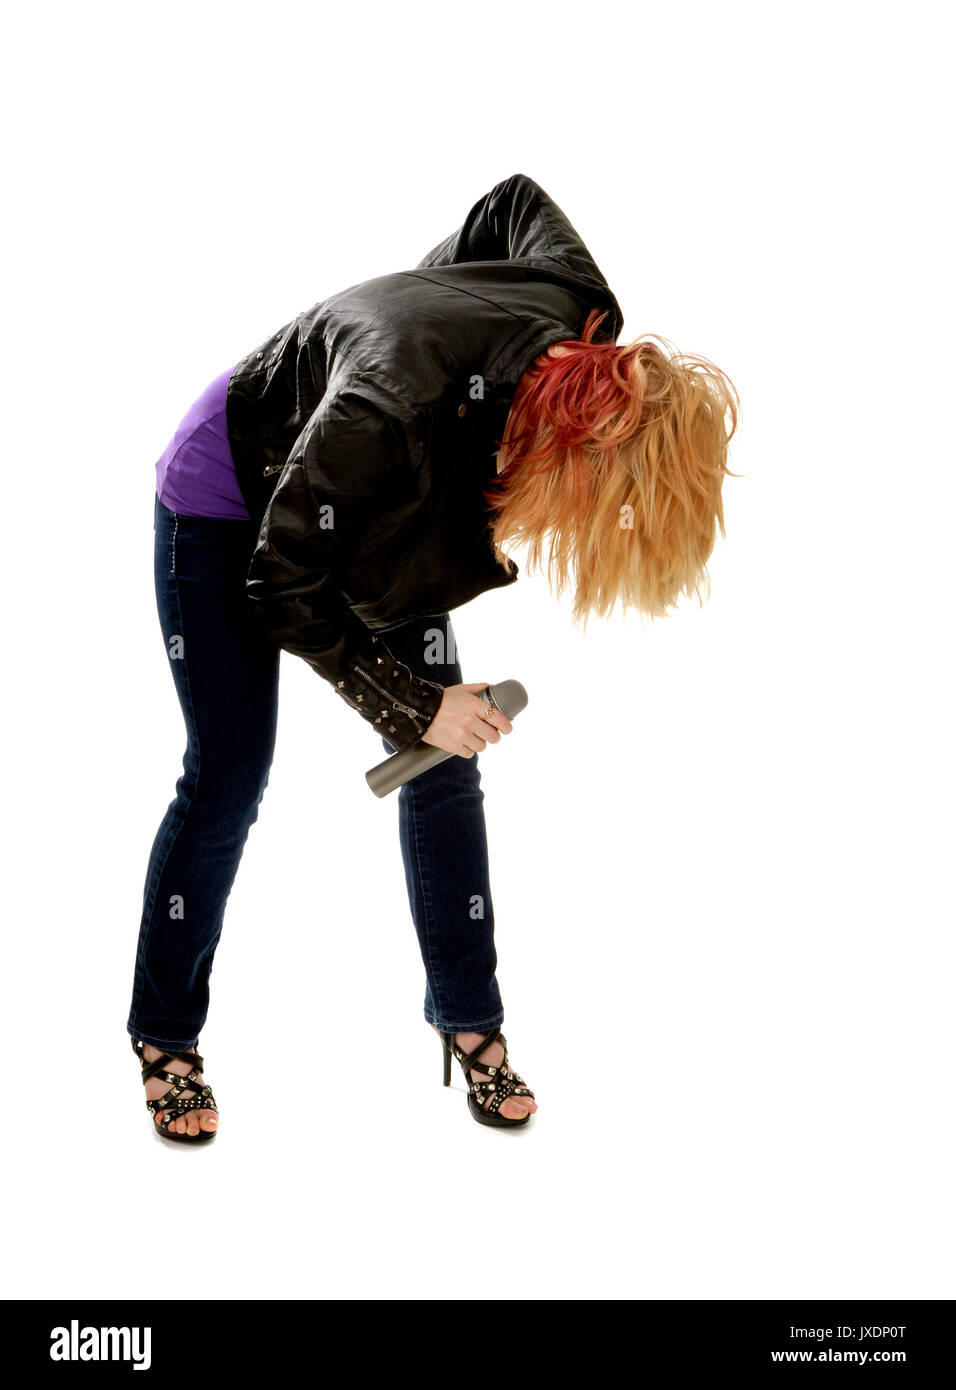 A Rocker Girl in Leather Jacket Doubles over Singing into Microphone Stock Photo